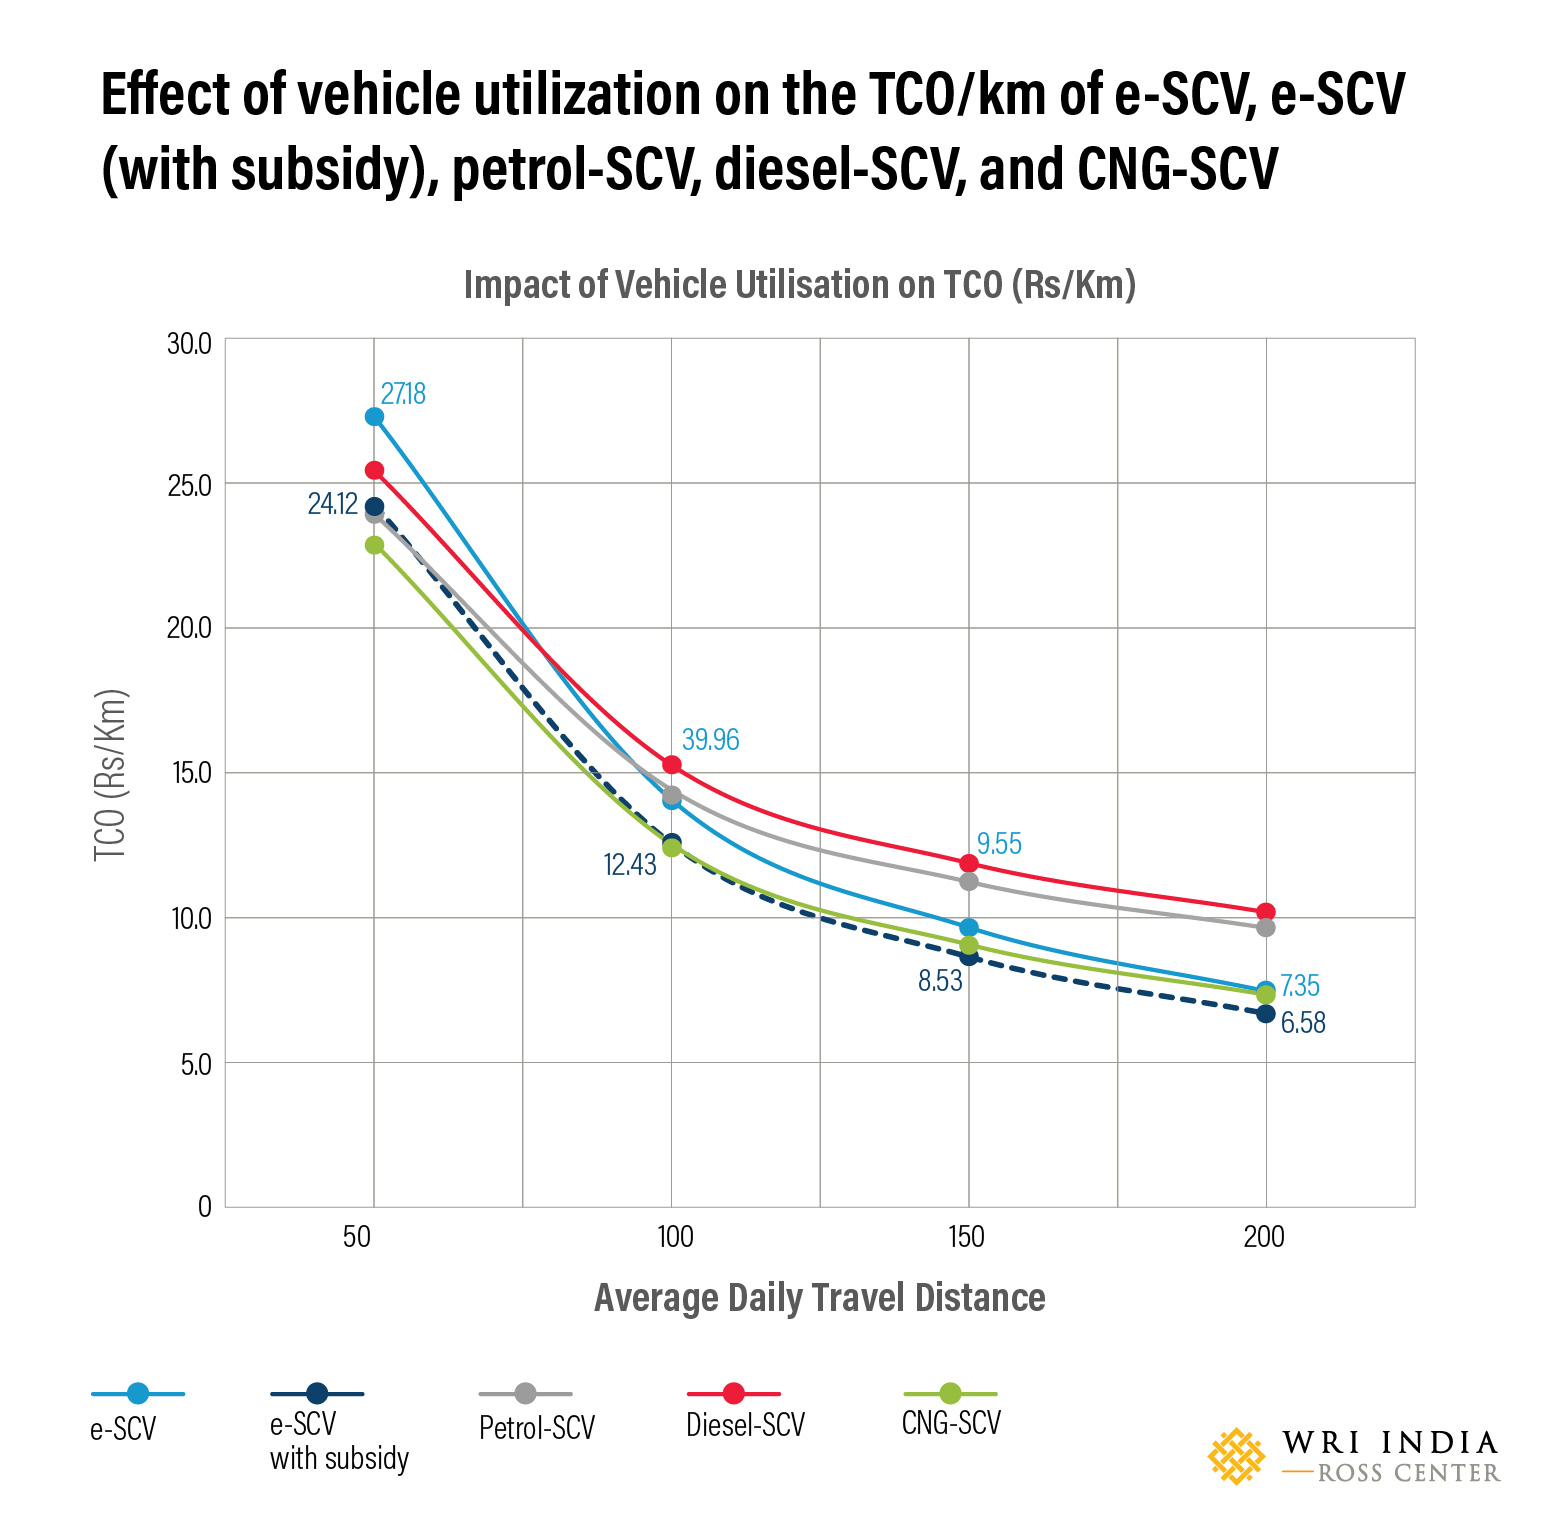 Effect of Vehicle utilization on the TCO/km of e-SCV, e-SCV (with subsidy, Petrol-SCV, Diesel-SCV, and CNG-SCV.